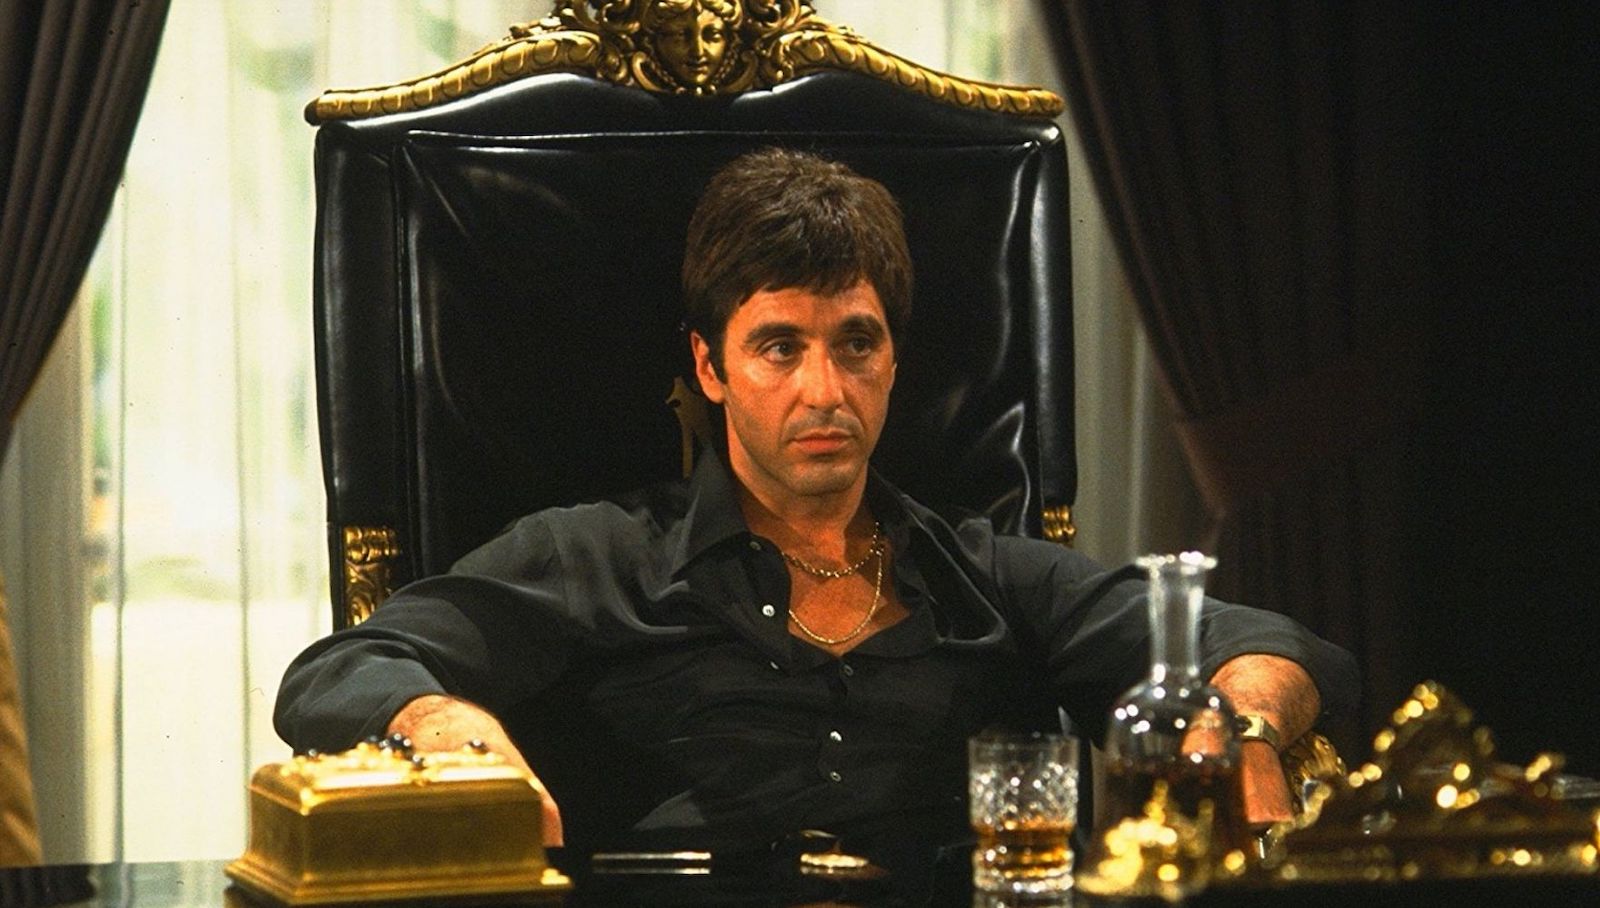 A man with a silver necklace and open collar sits in an ornate gold and black chair behind a desk in front of a whisky decanter and glass